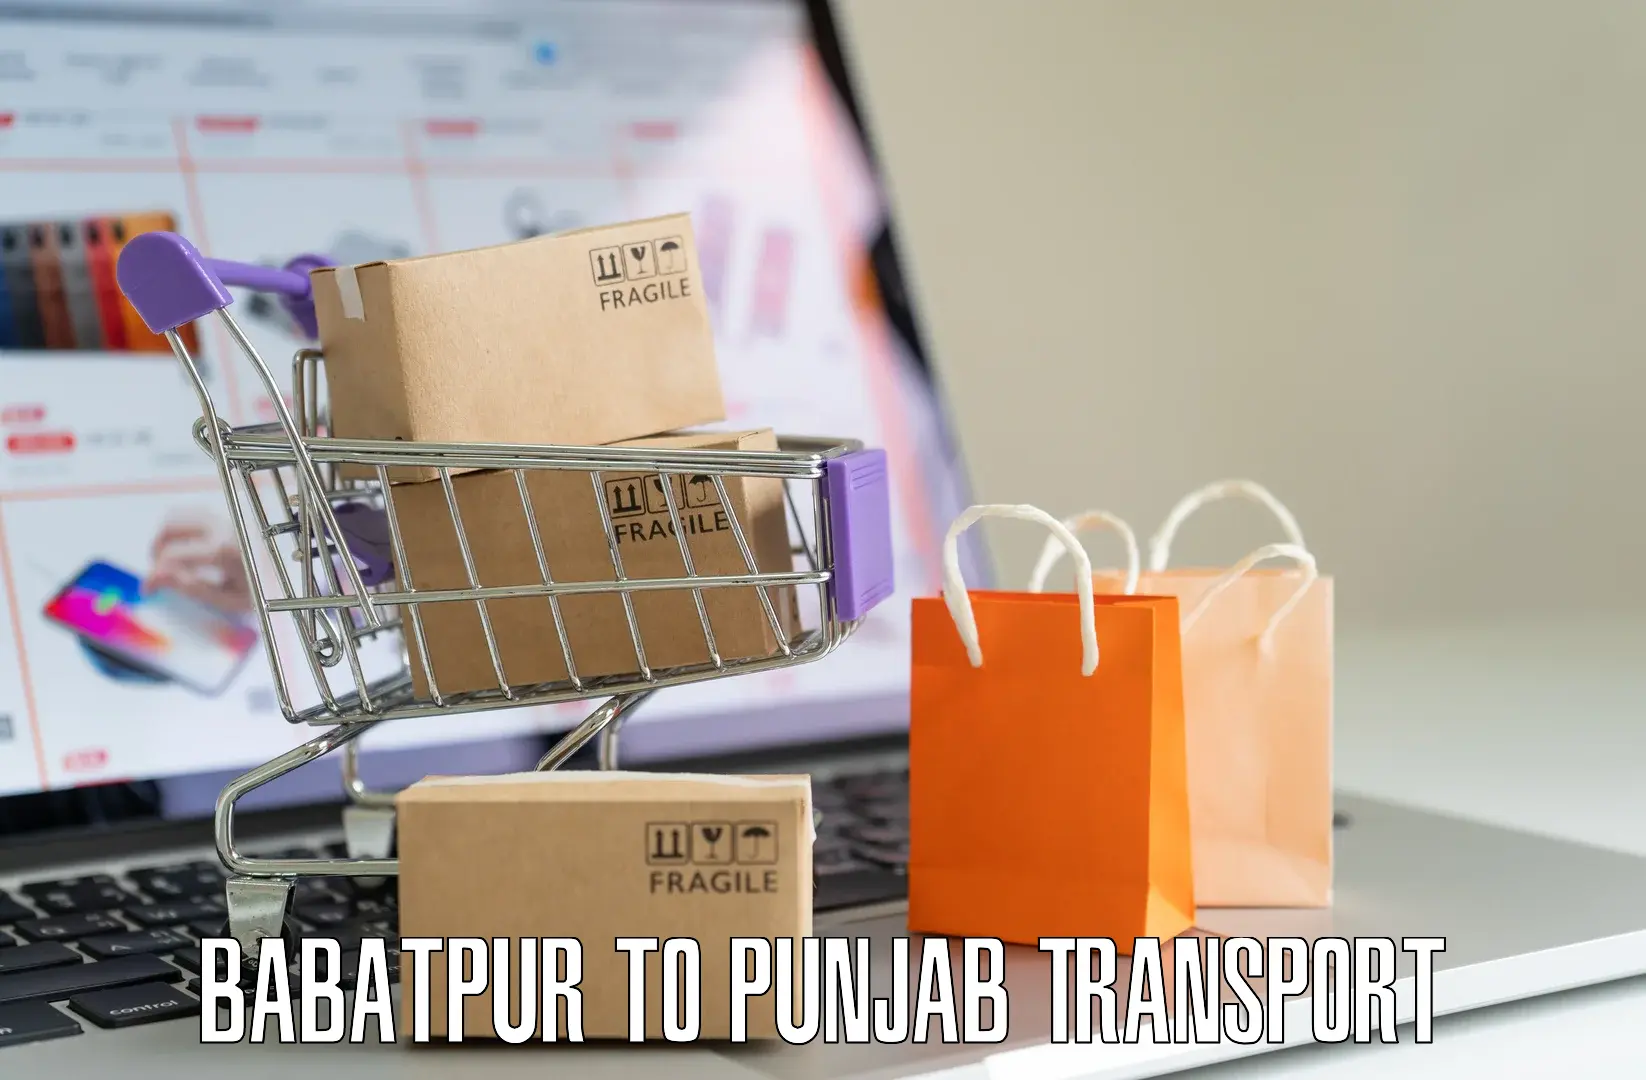 Vehicle courier services Babatpur to Batala